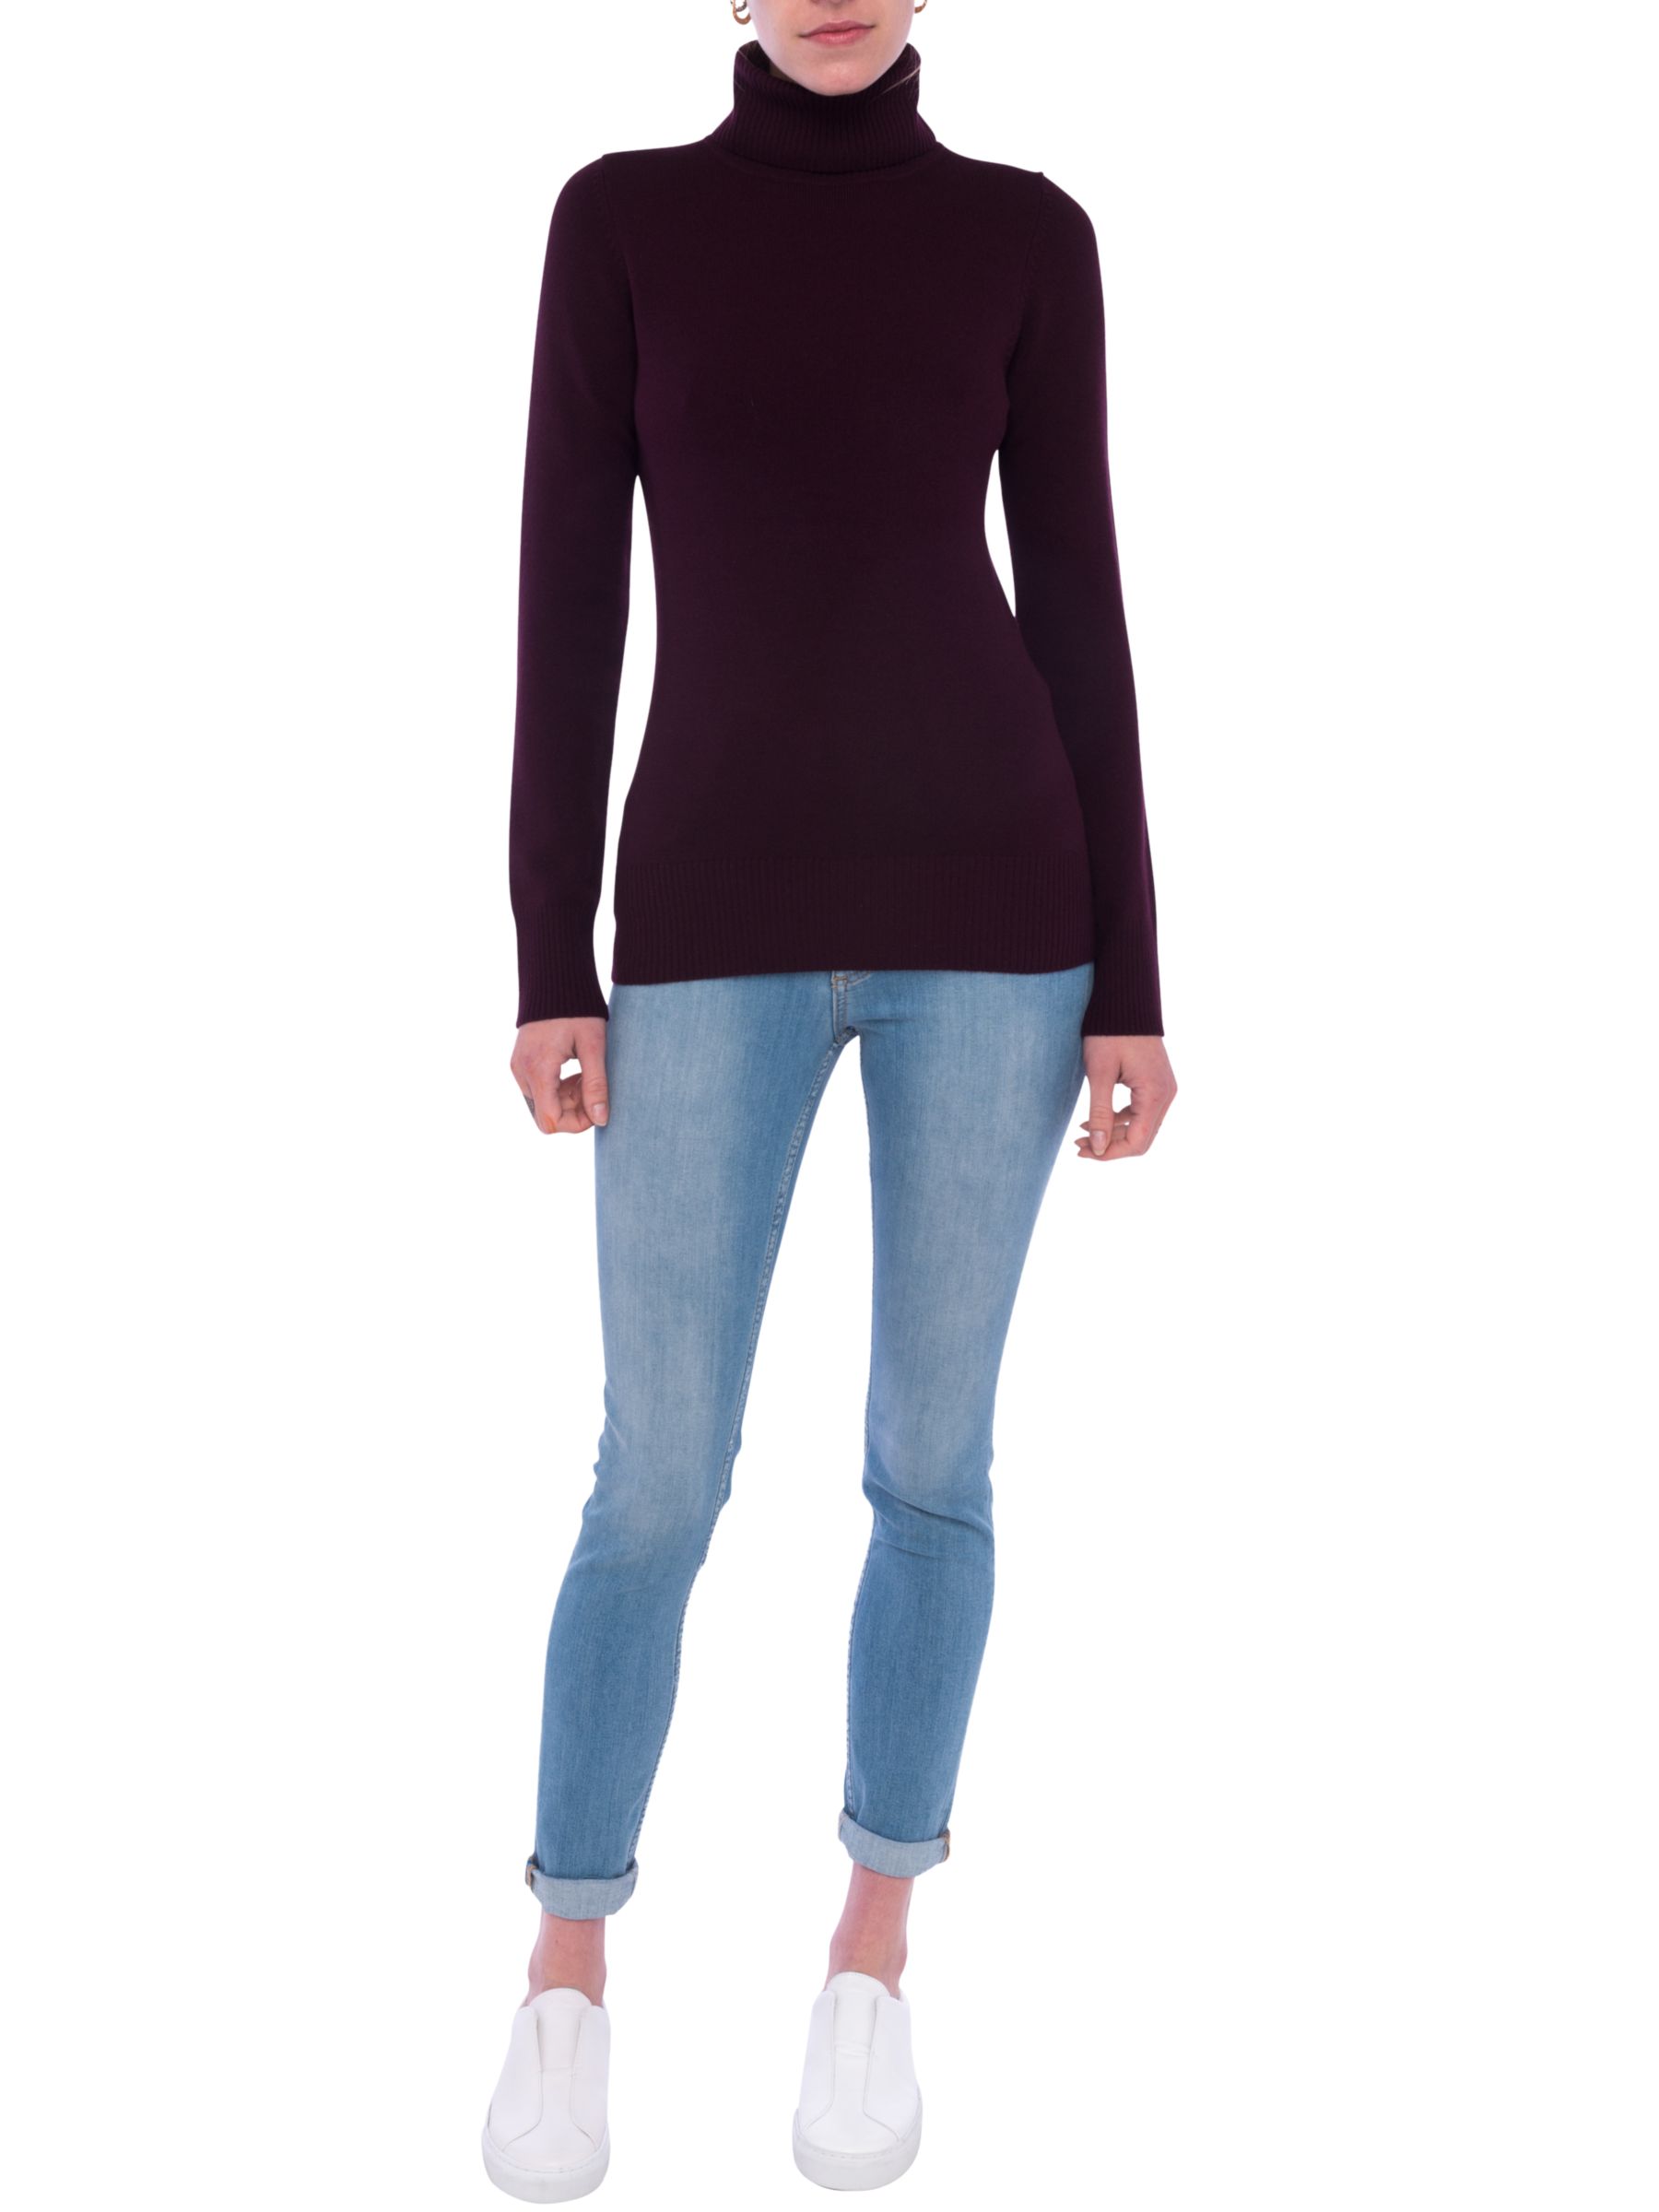 French Connection Babysoft Solid Turtleneck Jumper, Evening Wine, XS